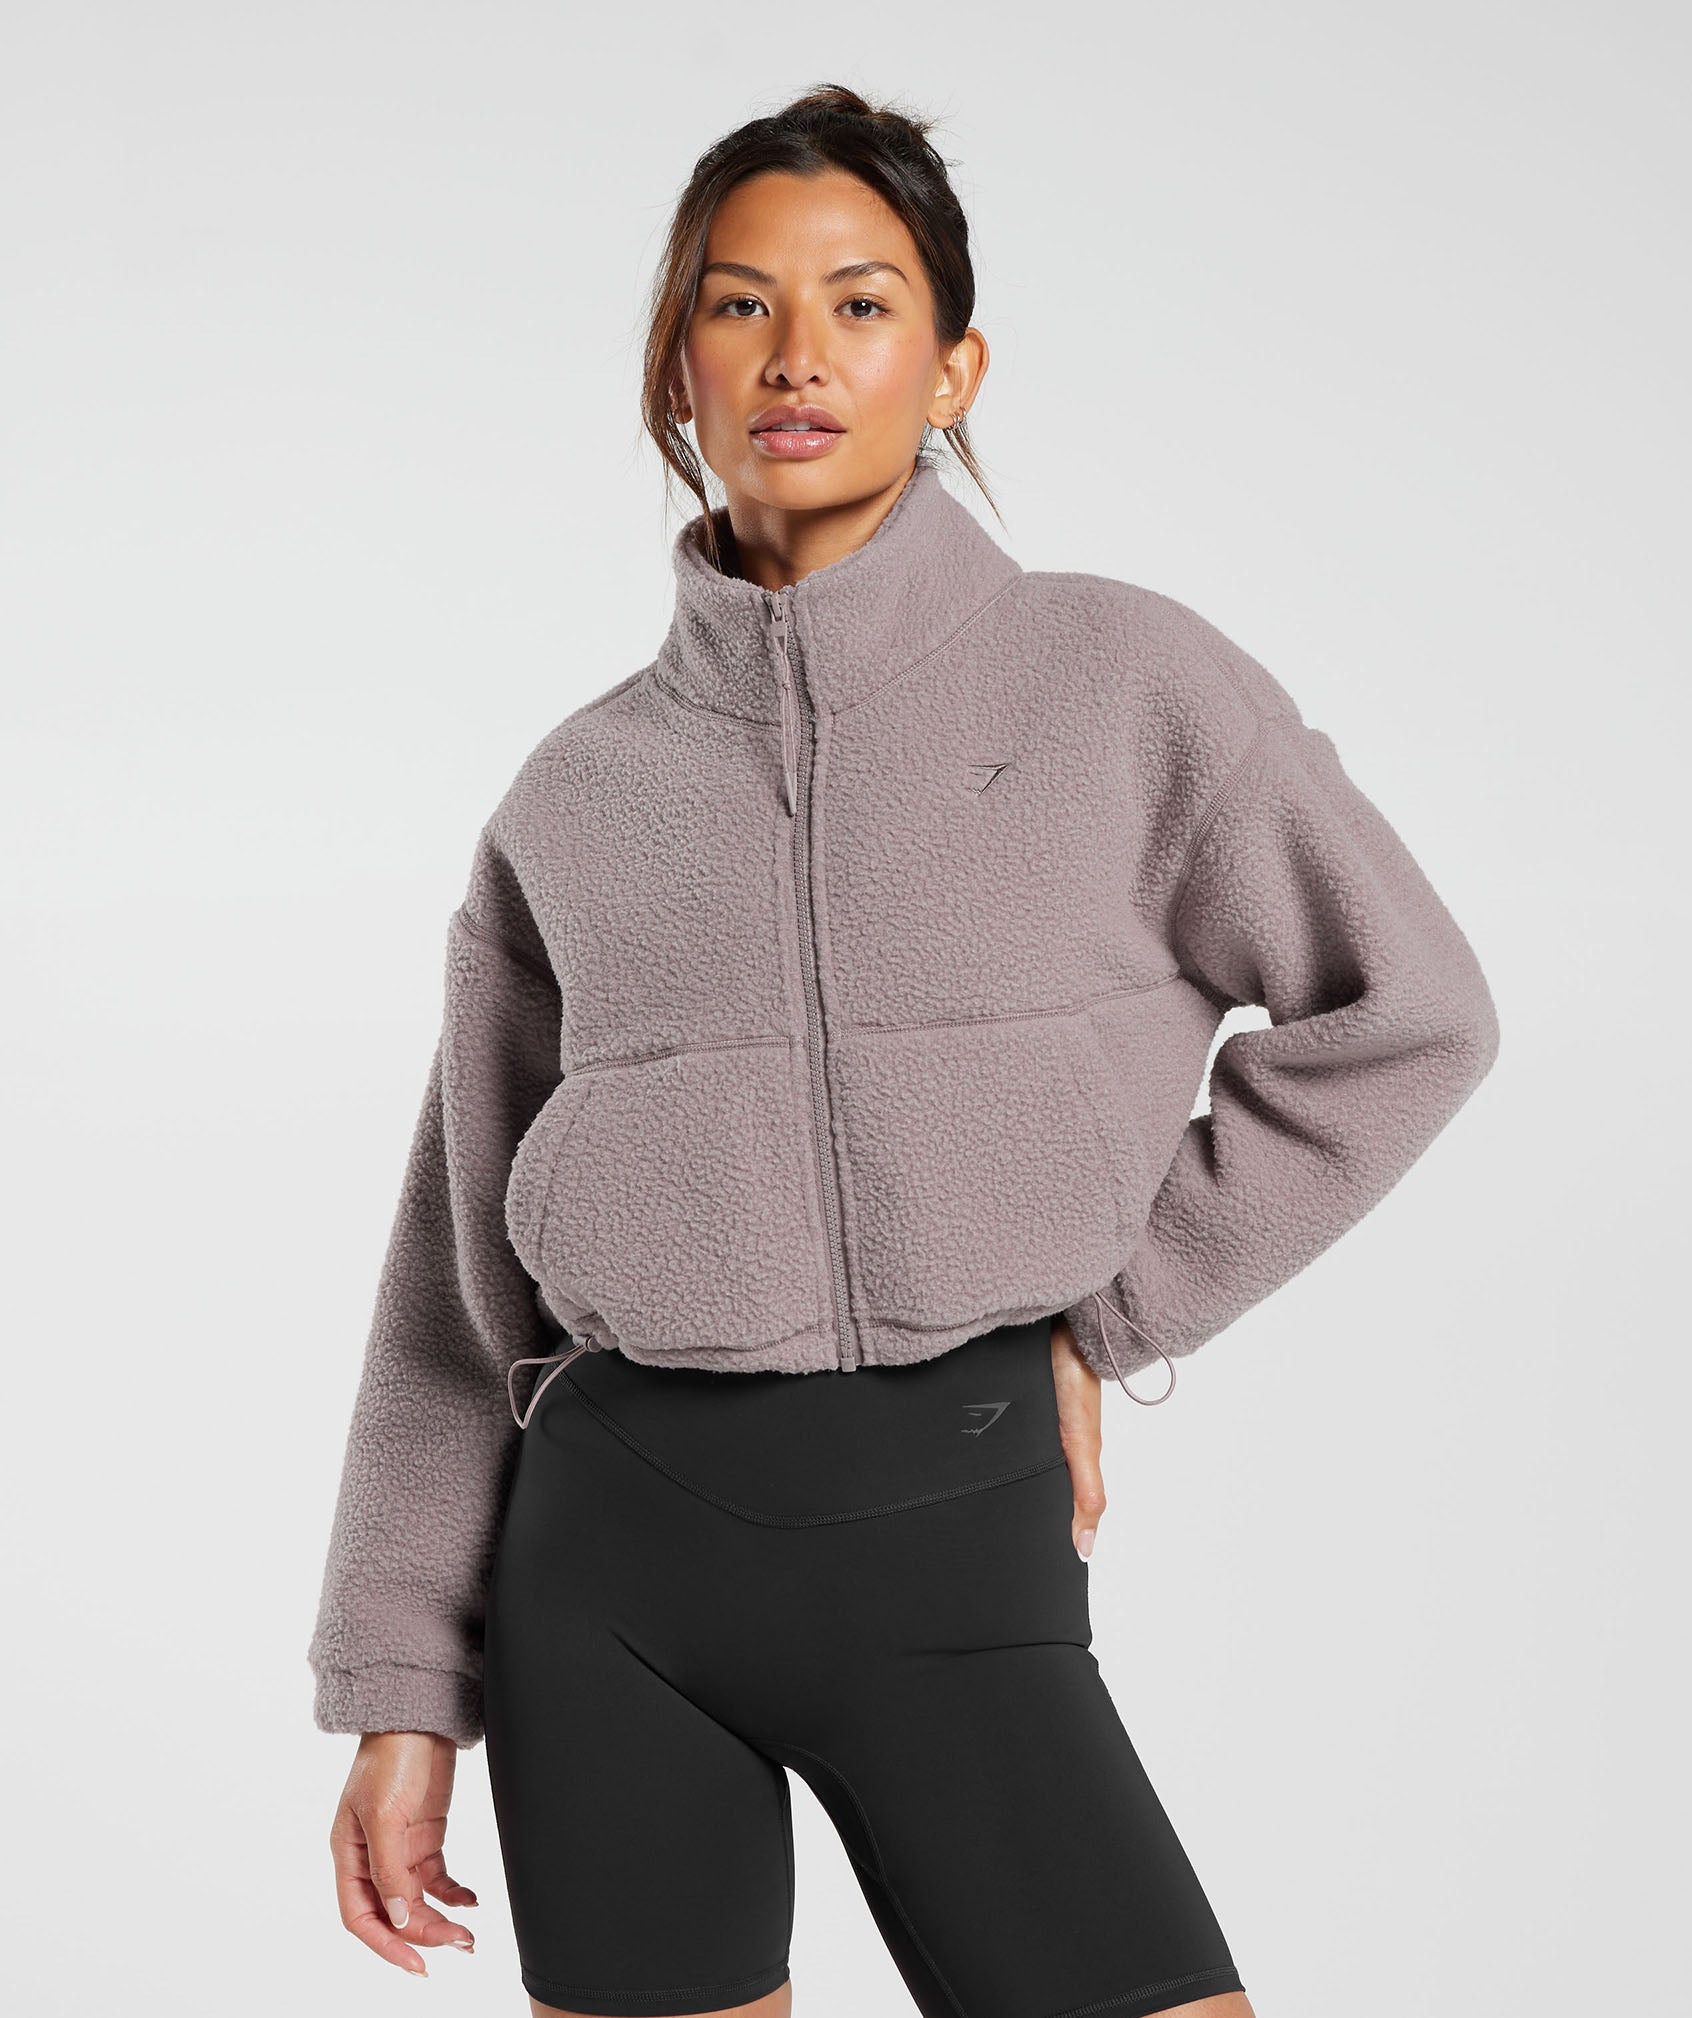 Elevate Fleece Midi Jacket in Washed Mauve - view 1